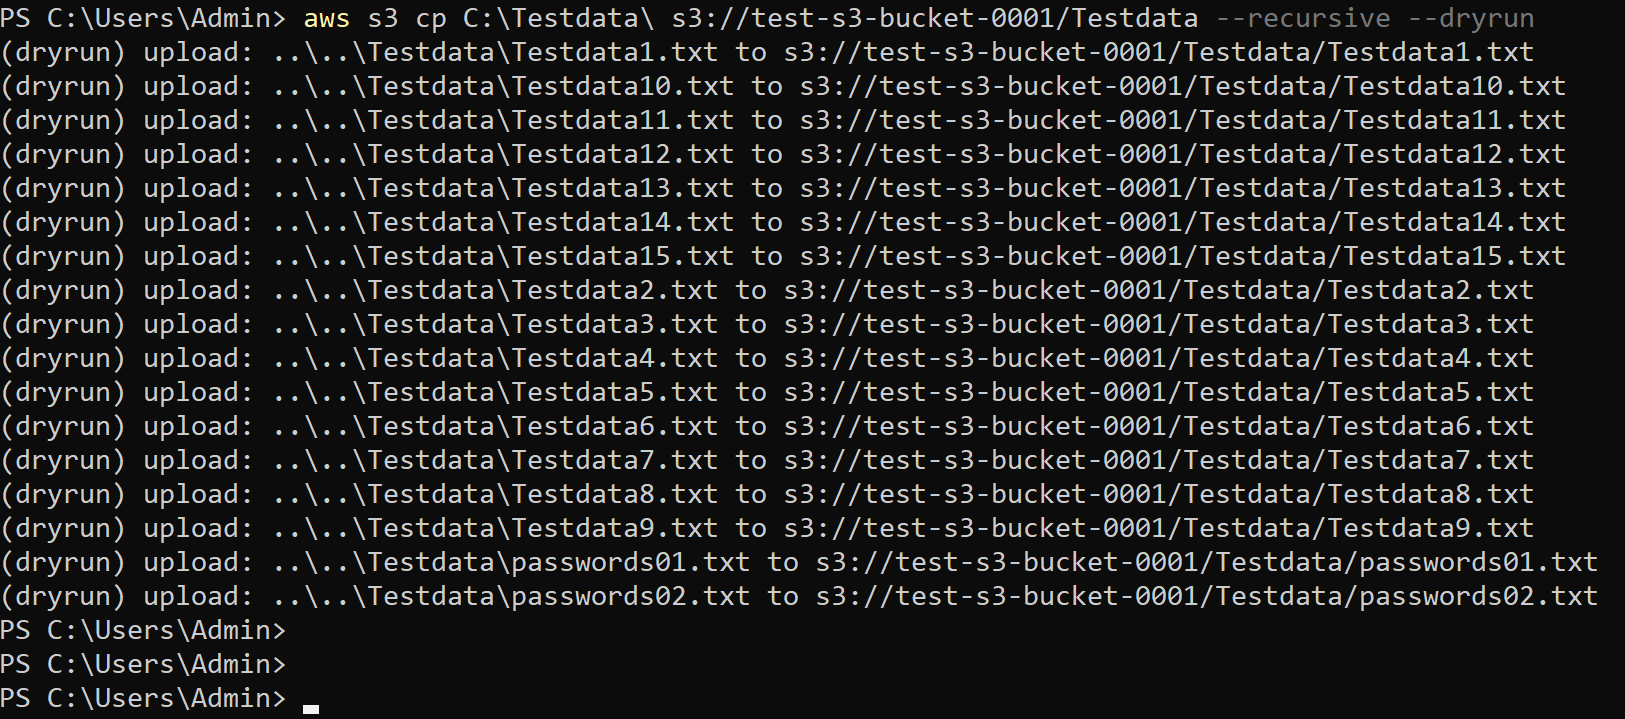 Performing a dry run of copying local files to an S3 bucket